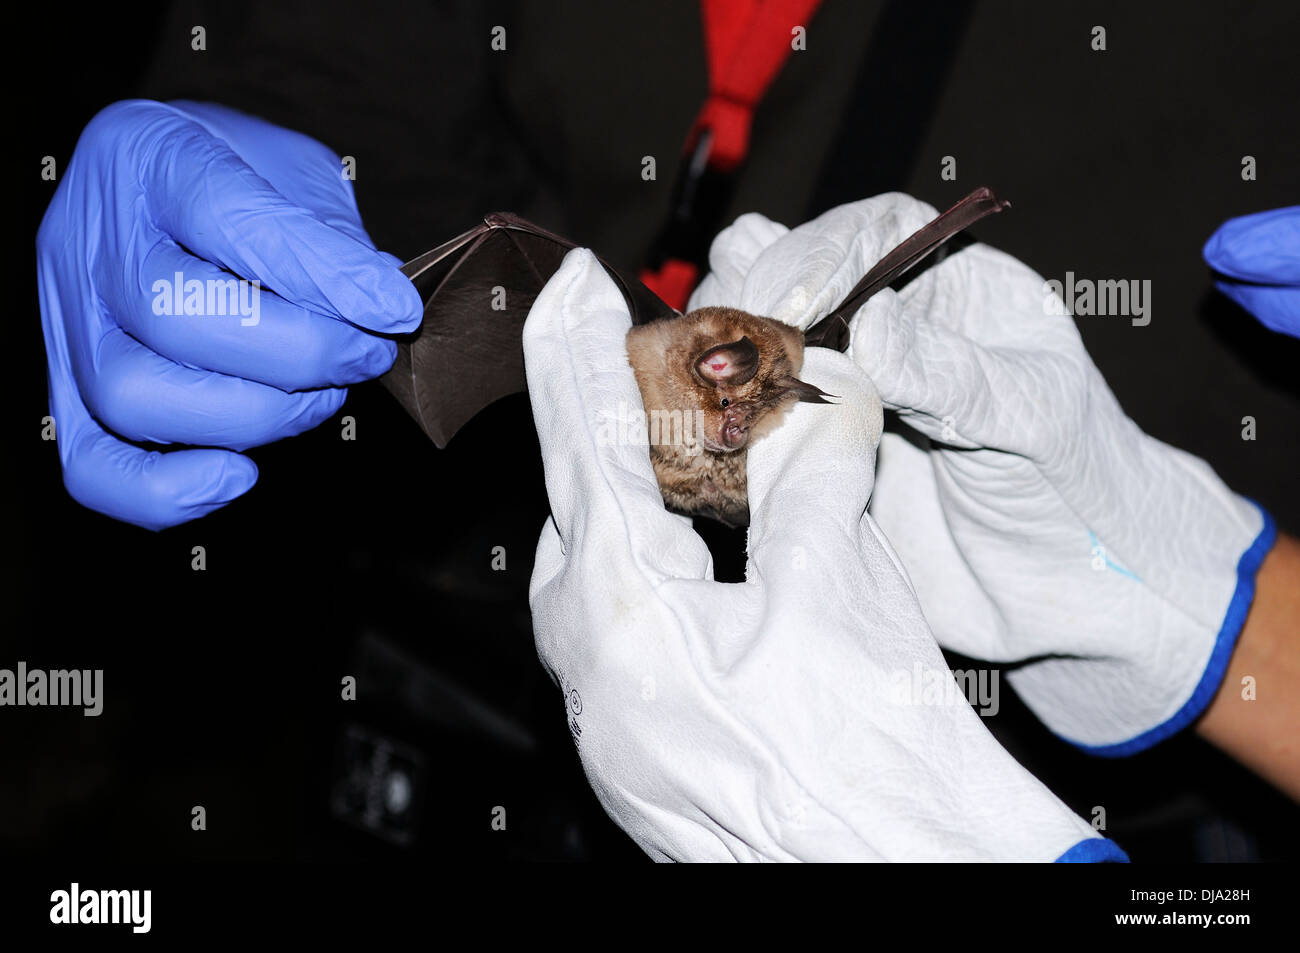 Horizontal portrait of two researchers at work with a captured greater horseshoe bat in their hands at night. Stock Photo